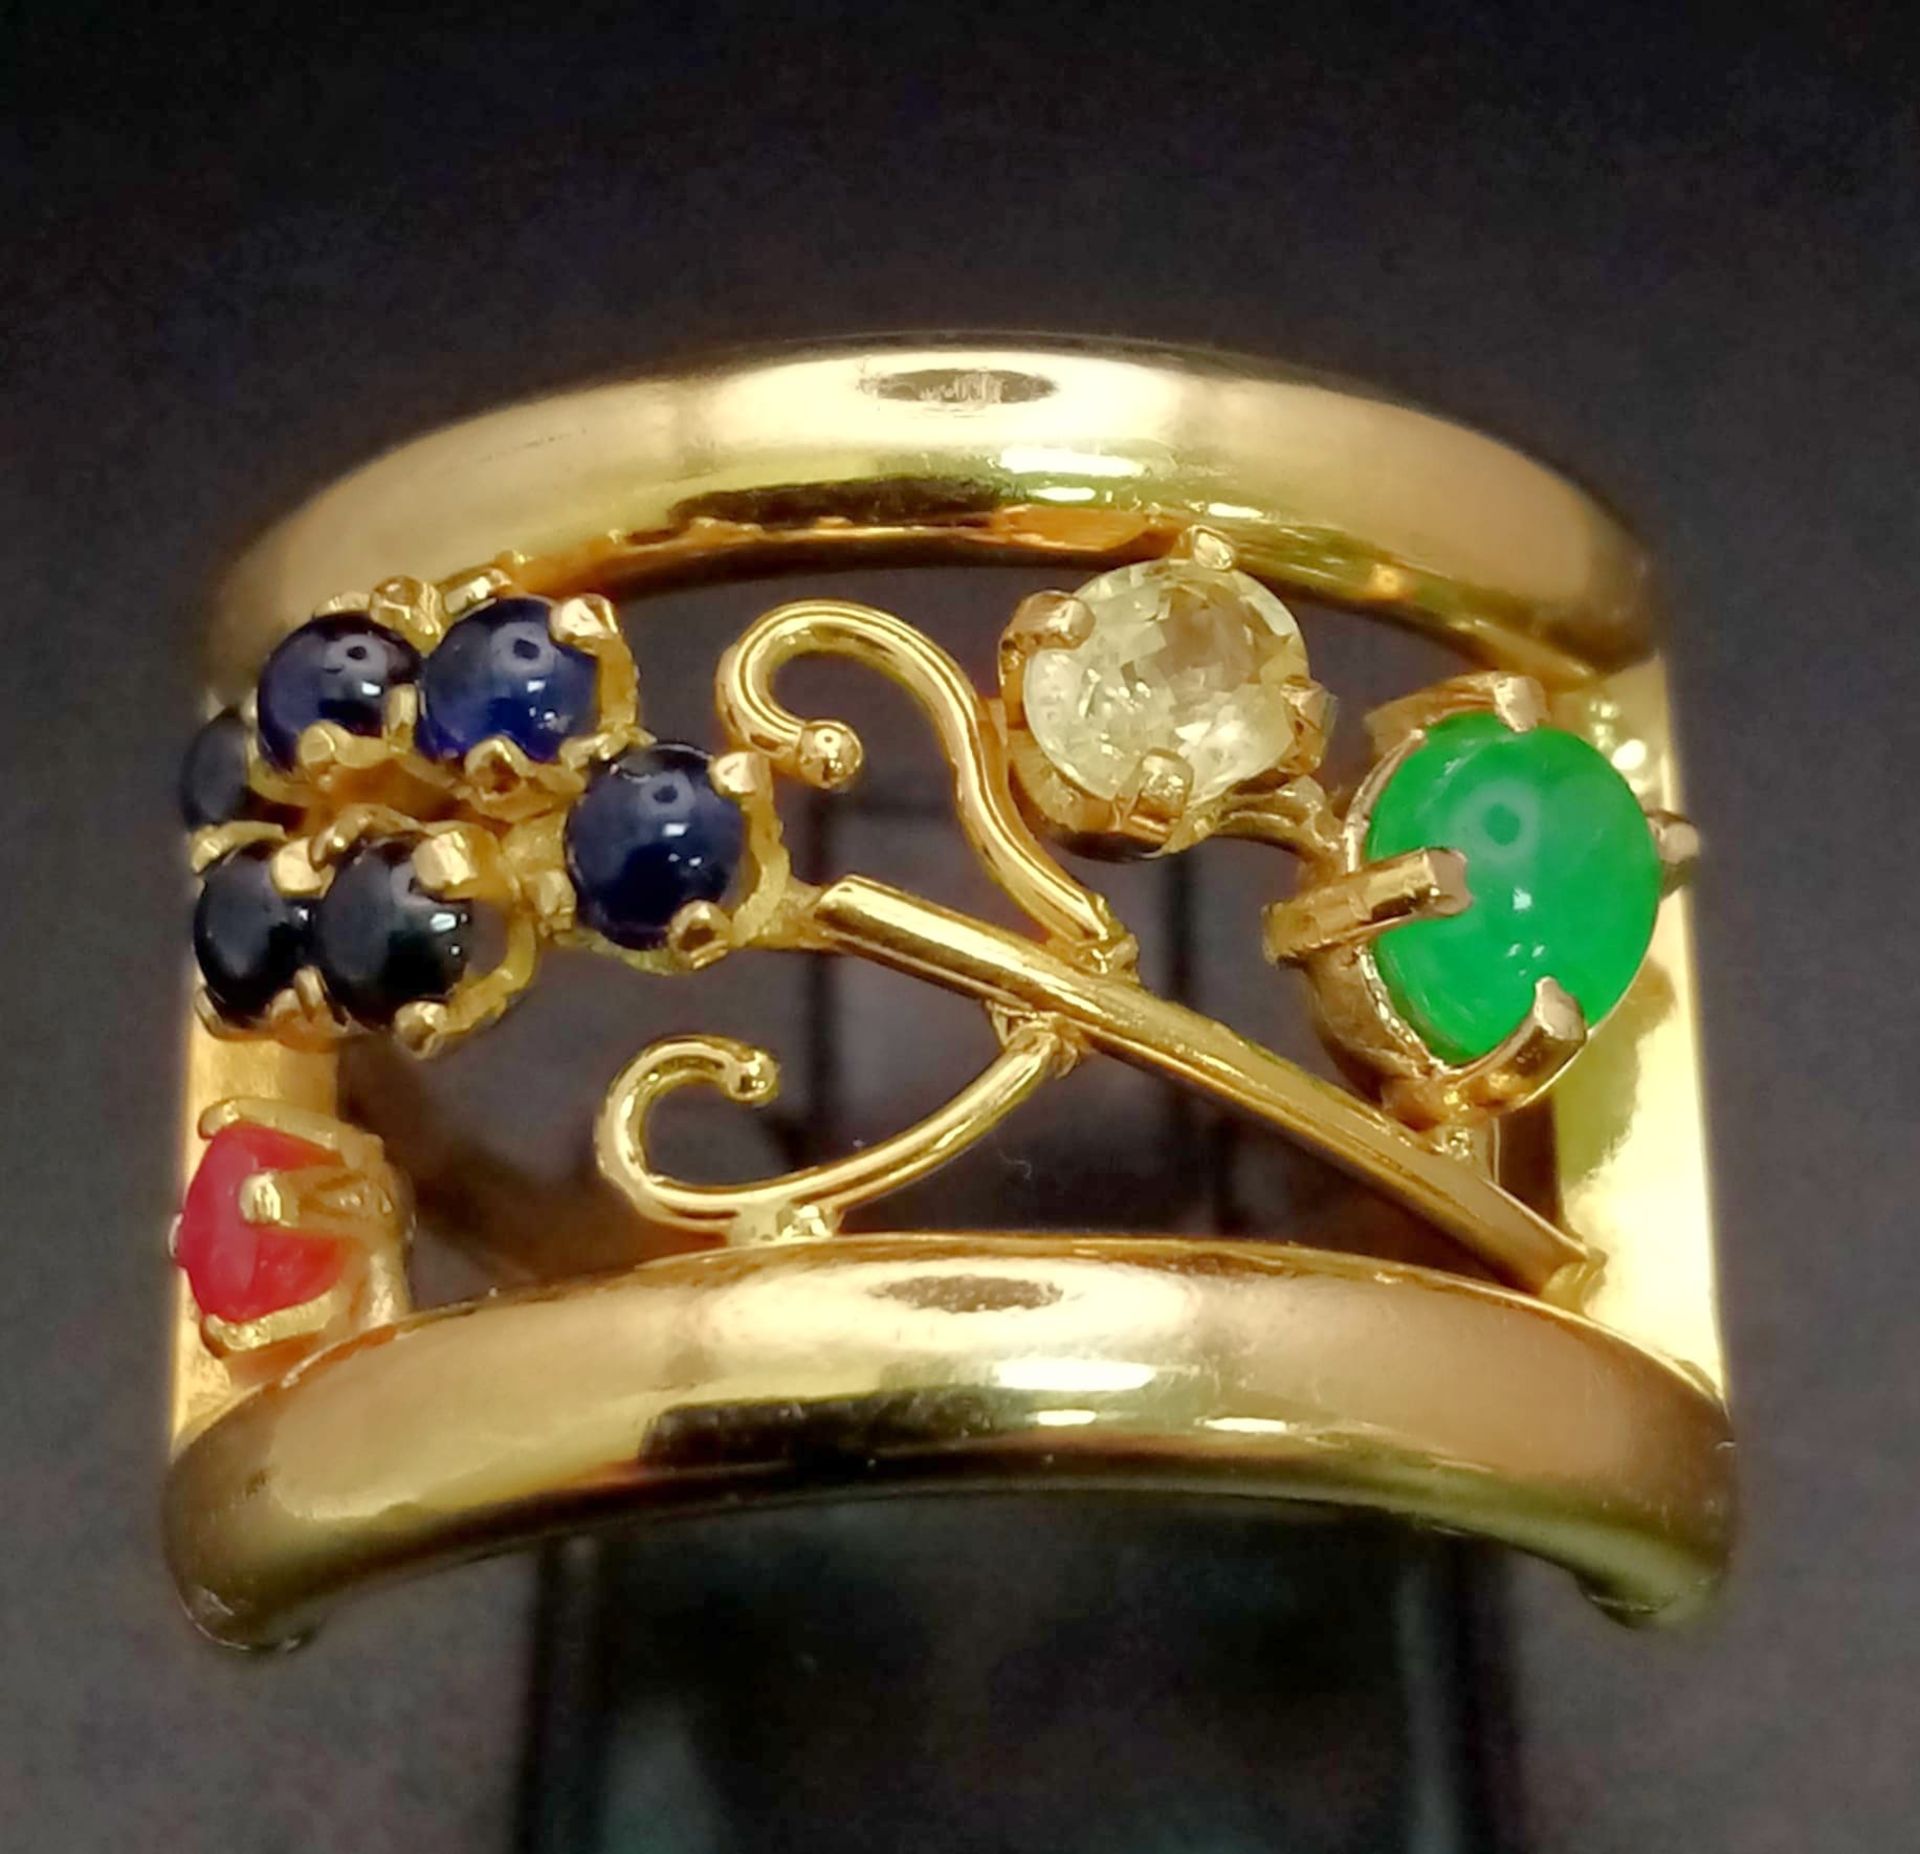 An 18 K yellow gold ring with an artistic design and adorned with an emerald cabochon, plus ruby,